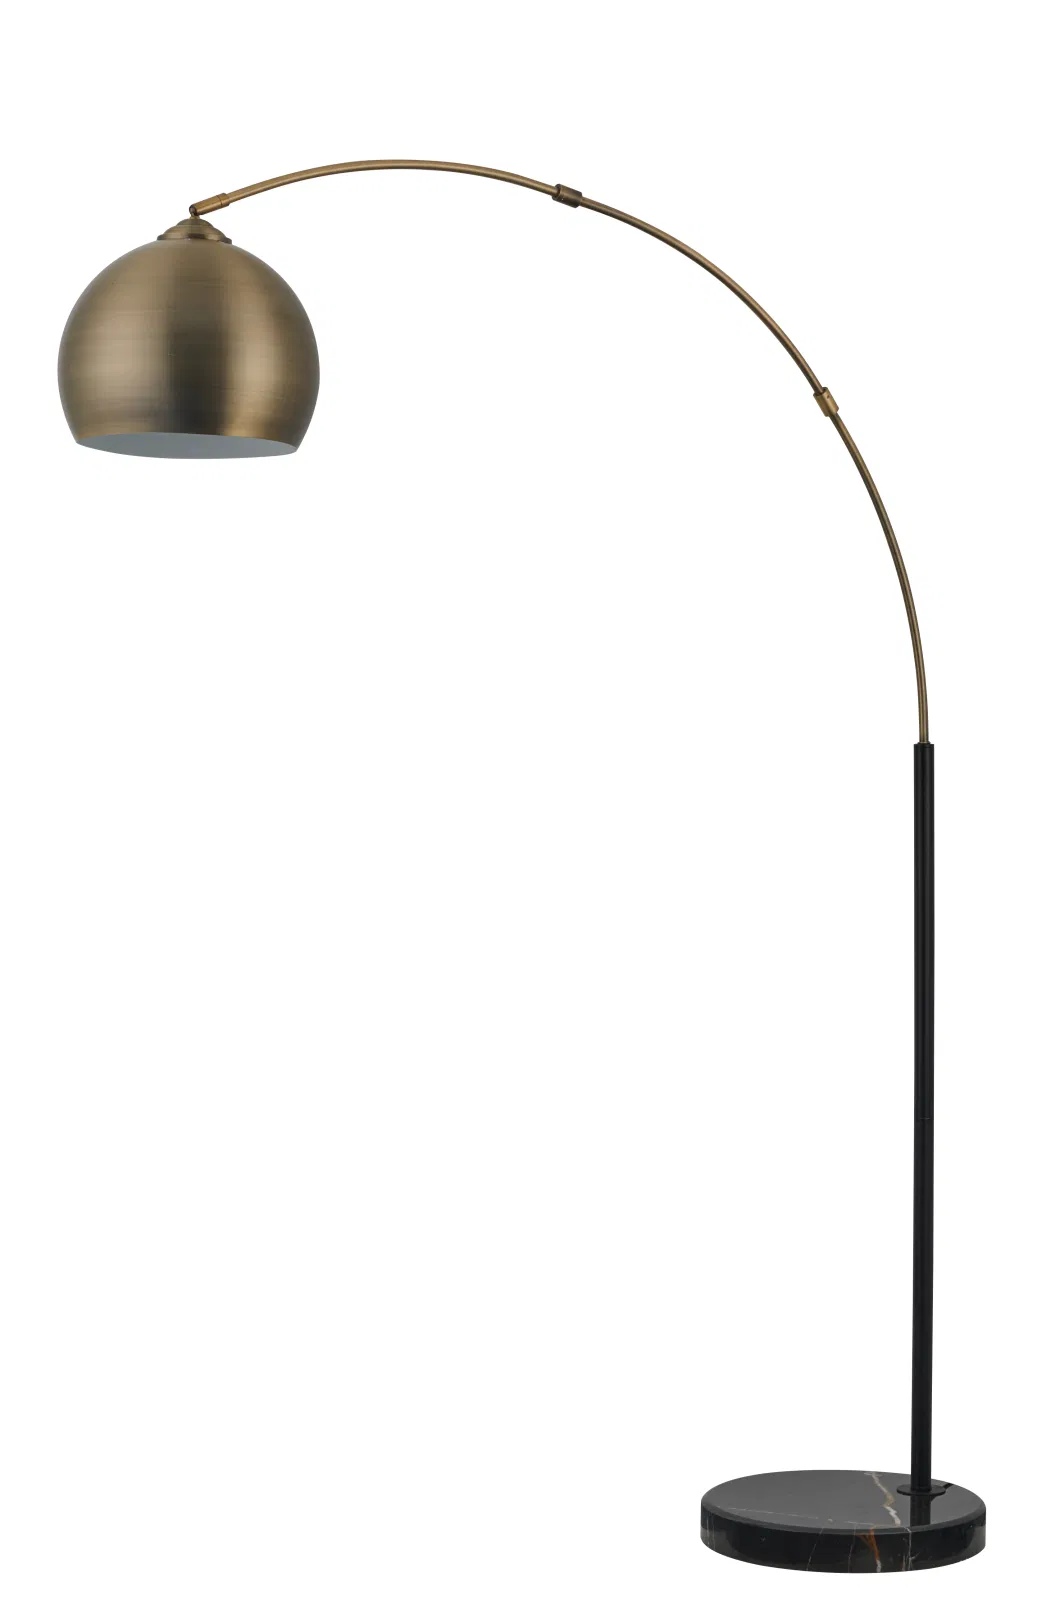 2 Color Bronze Metal Shade Stand Lamp, Fishing Light with Marble Base